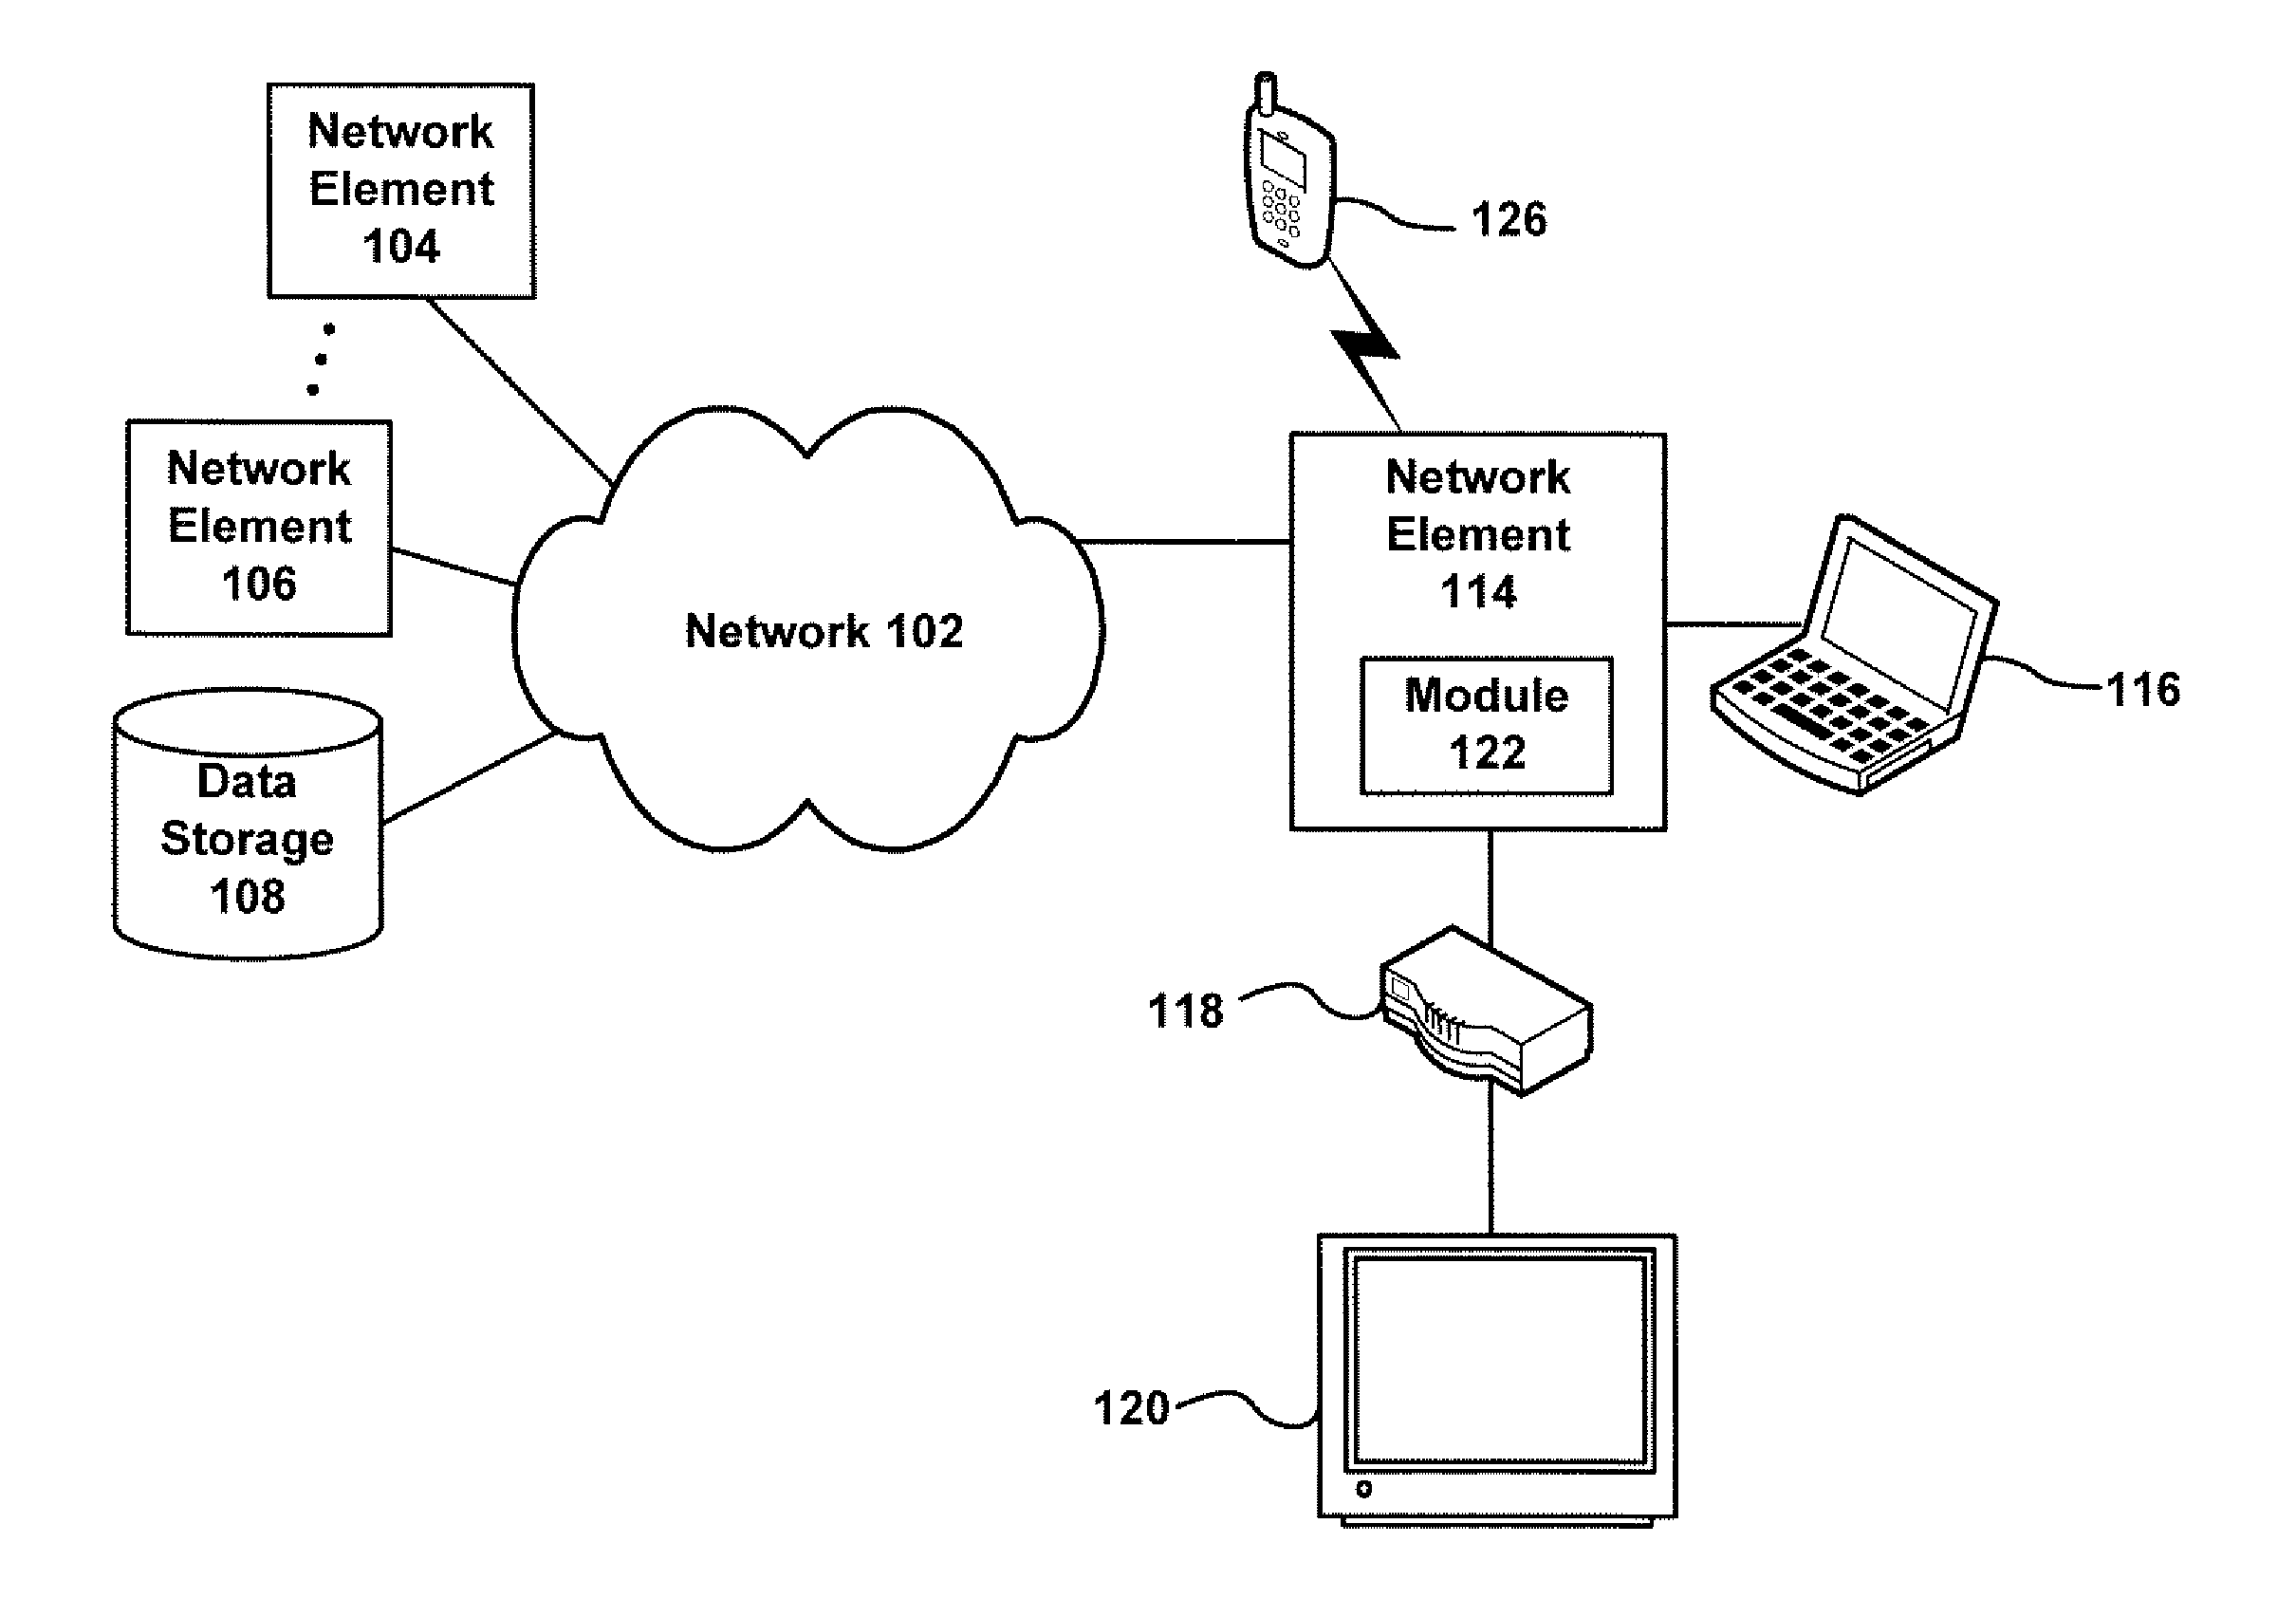 System for and method of performing residential gateway diagnostics and corrective actions